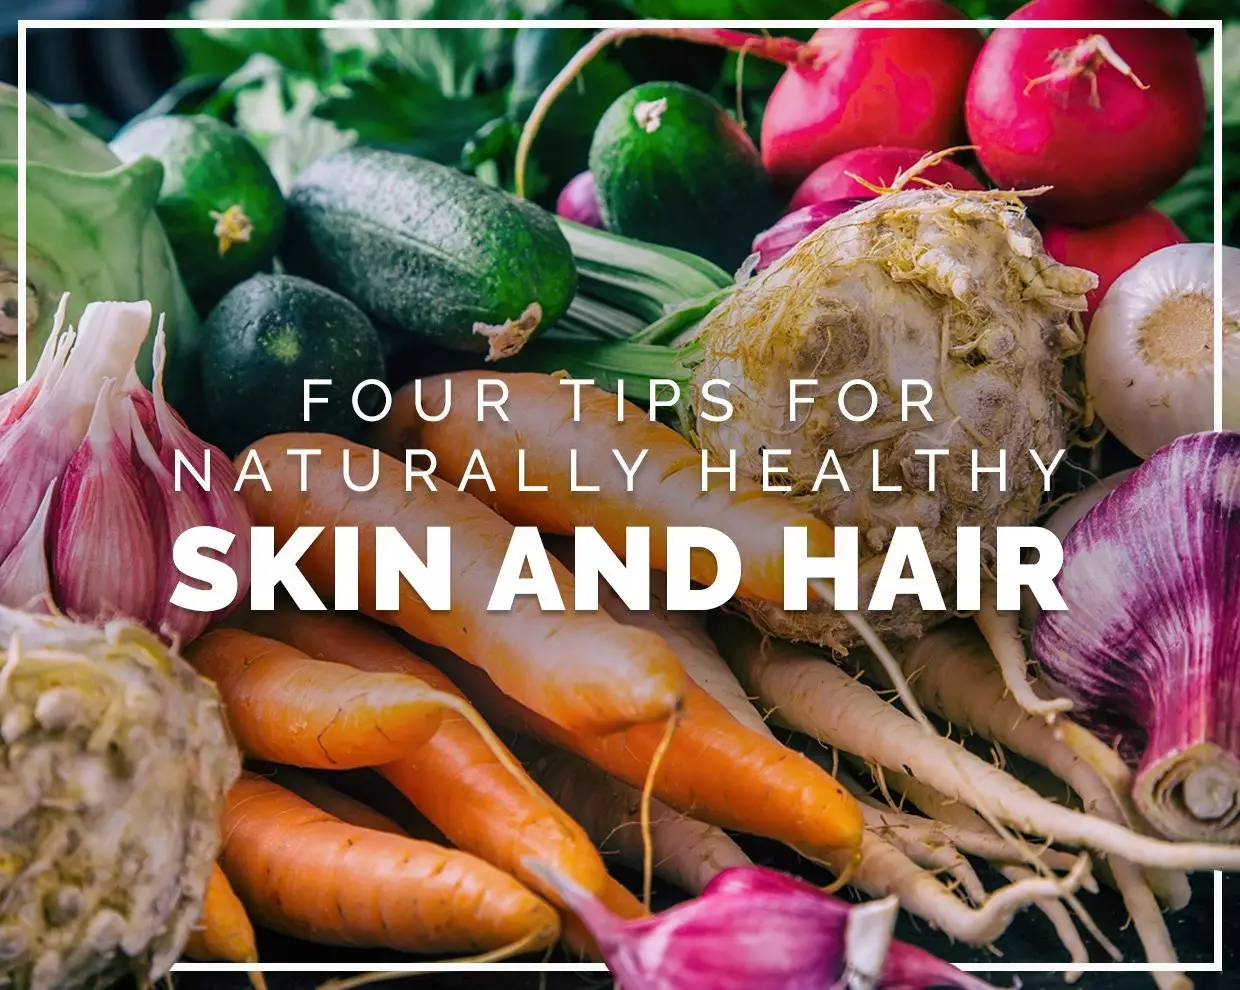 Four tips for naturally healthy skin and hair